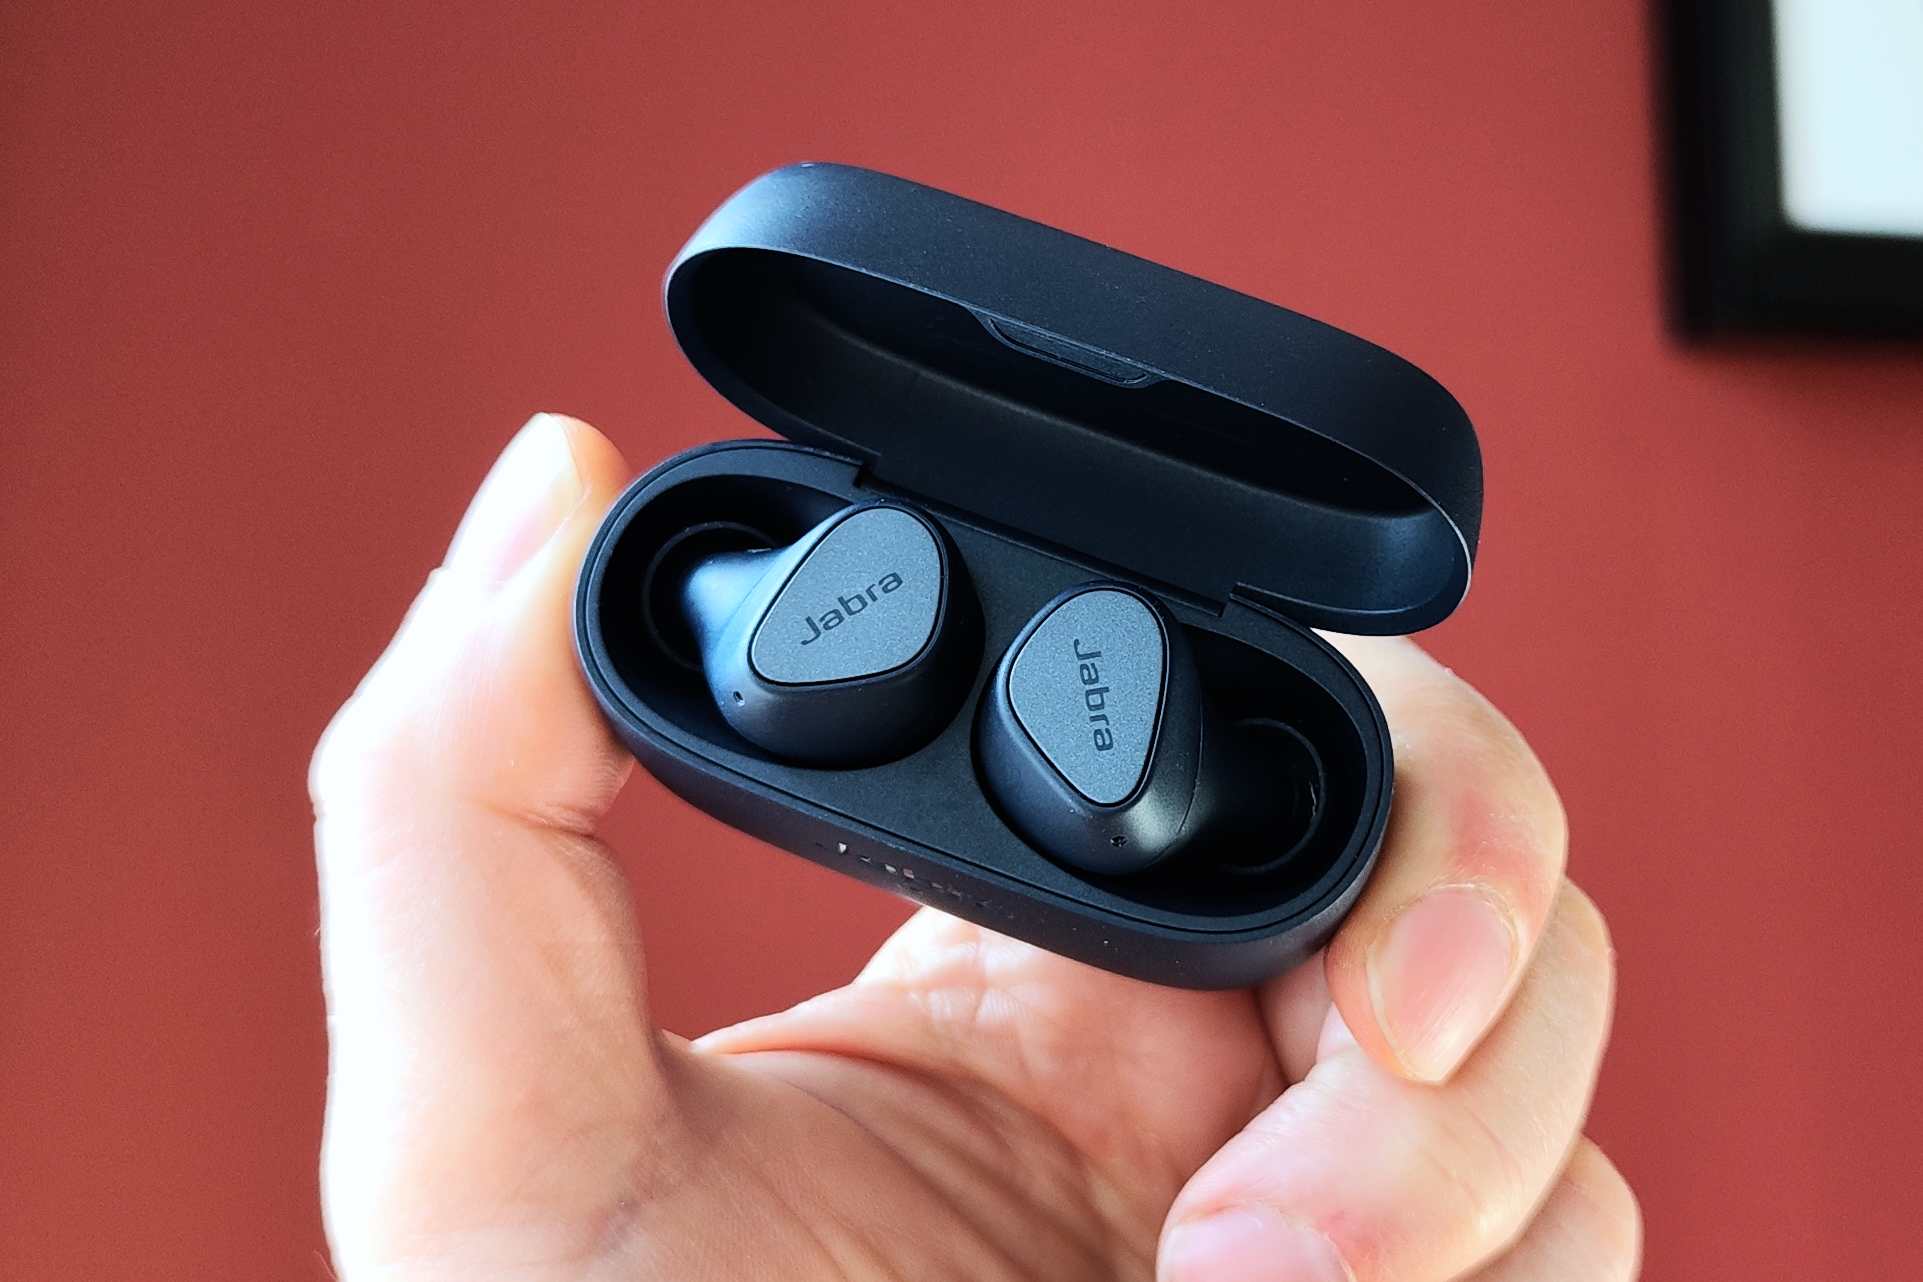 Jabra Elite 4 Active Earbuds Review: Everything you need - Reviewed